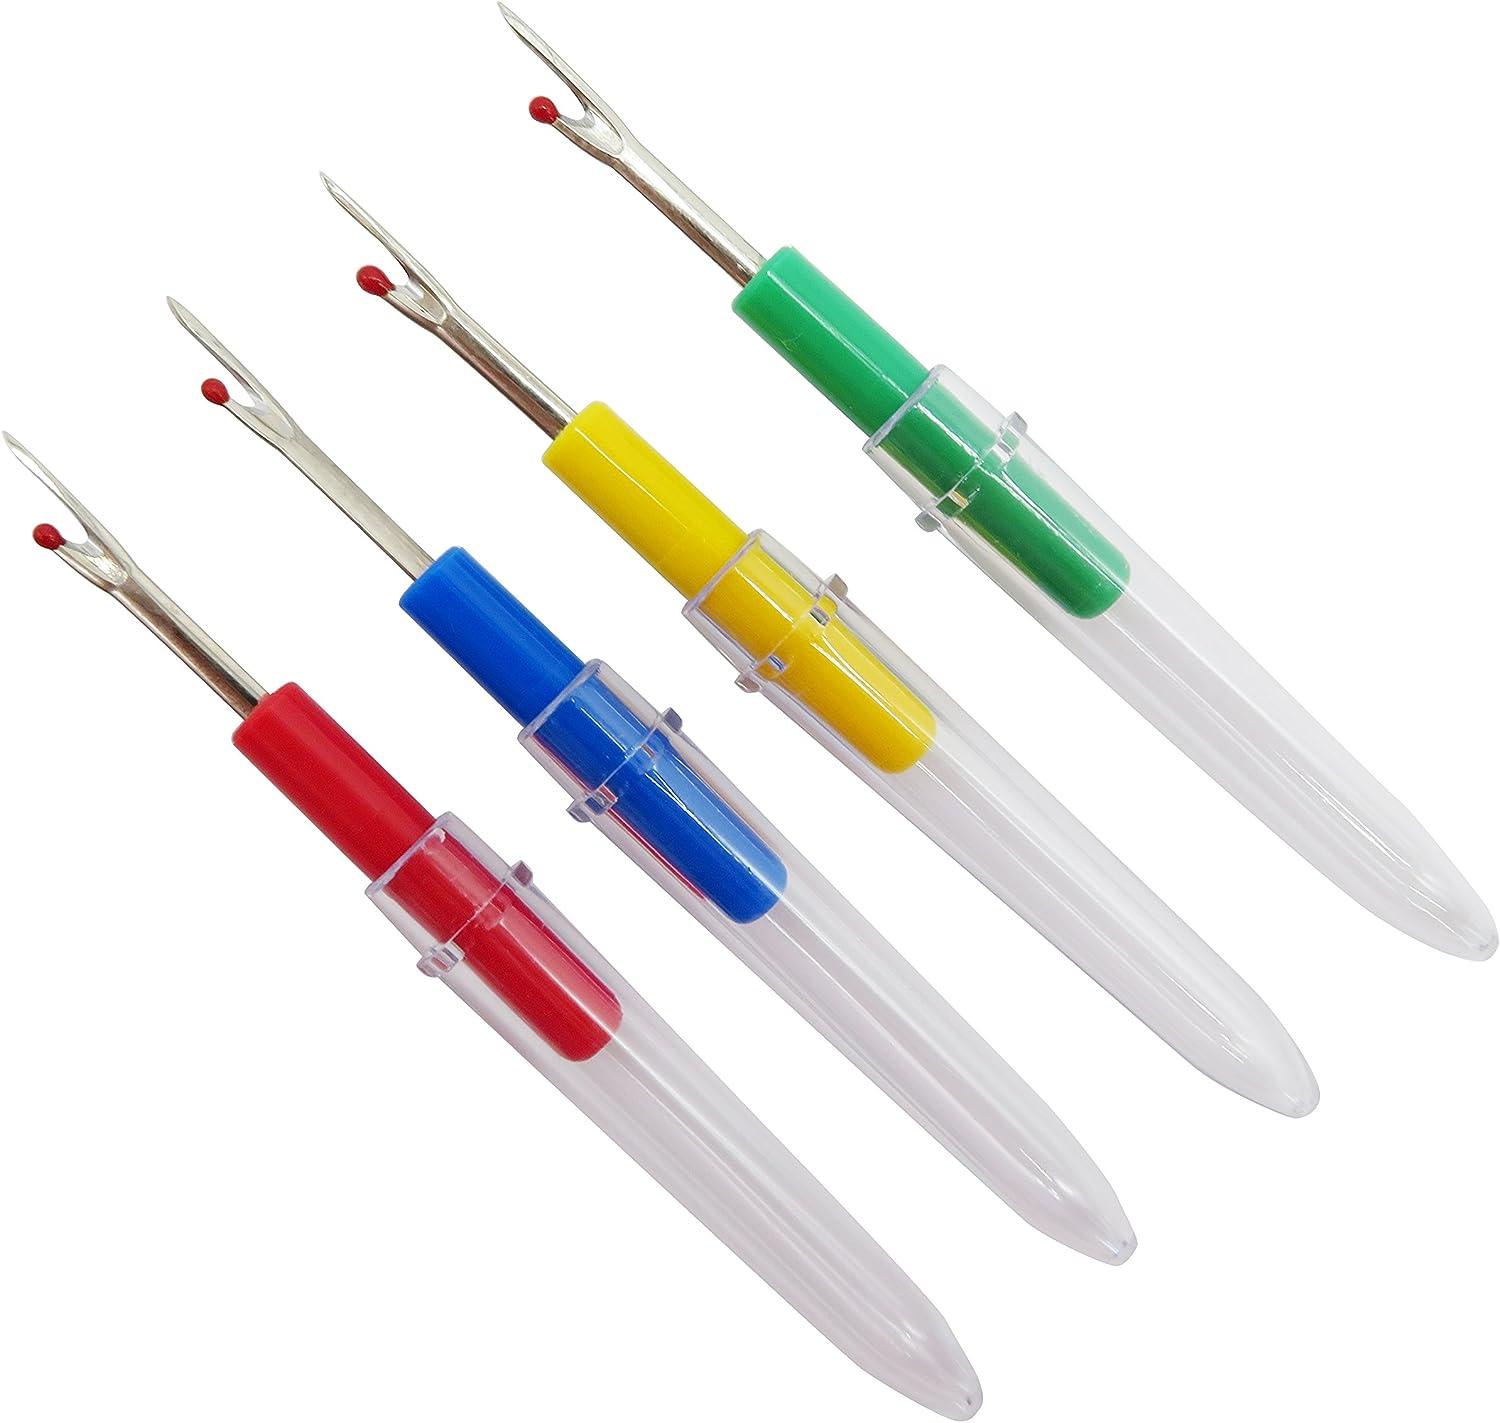 2-4Pcs Colorful Sewing Seam Ripper Thread Remover Handy Stitch Ripper  Sewing Tools for Opening Seams Hems Accessories